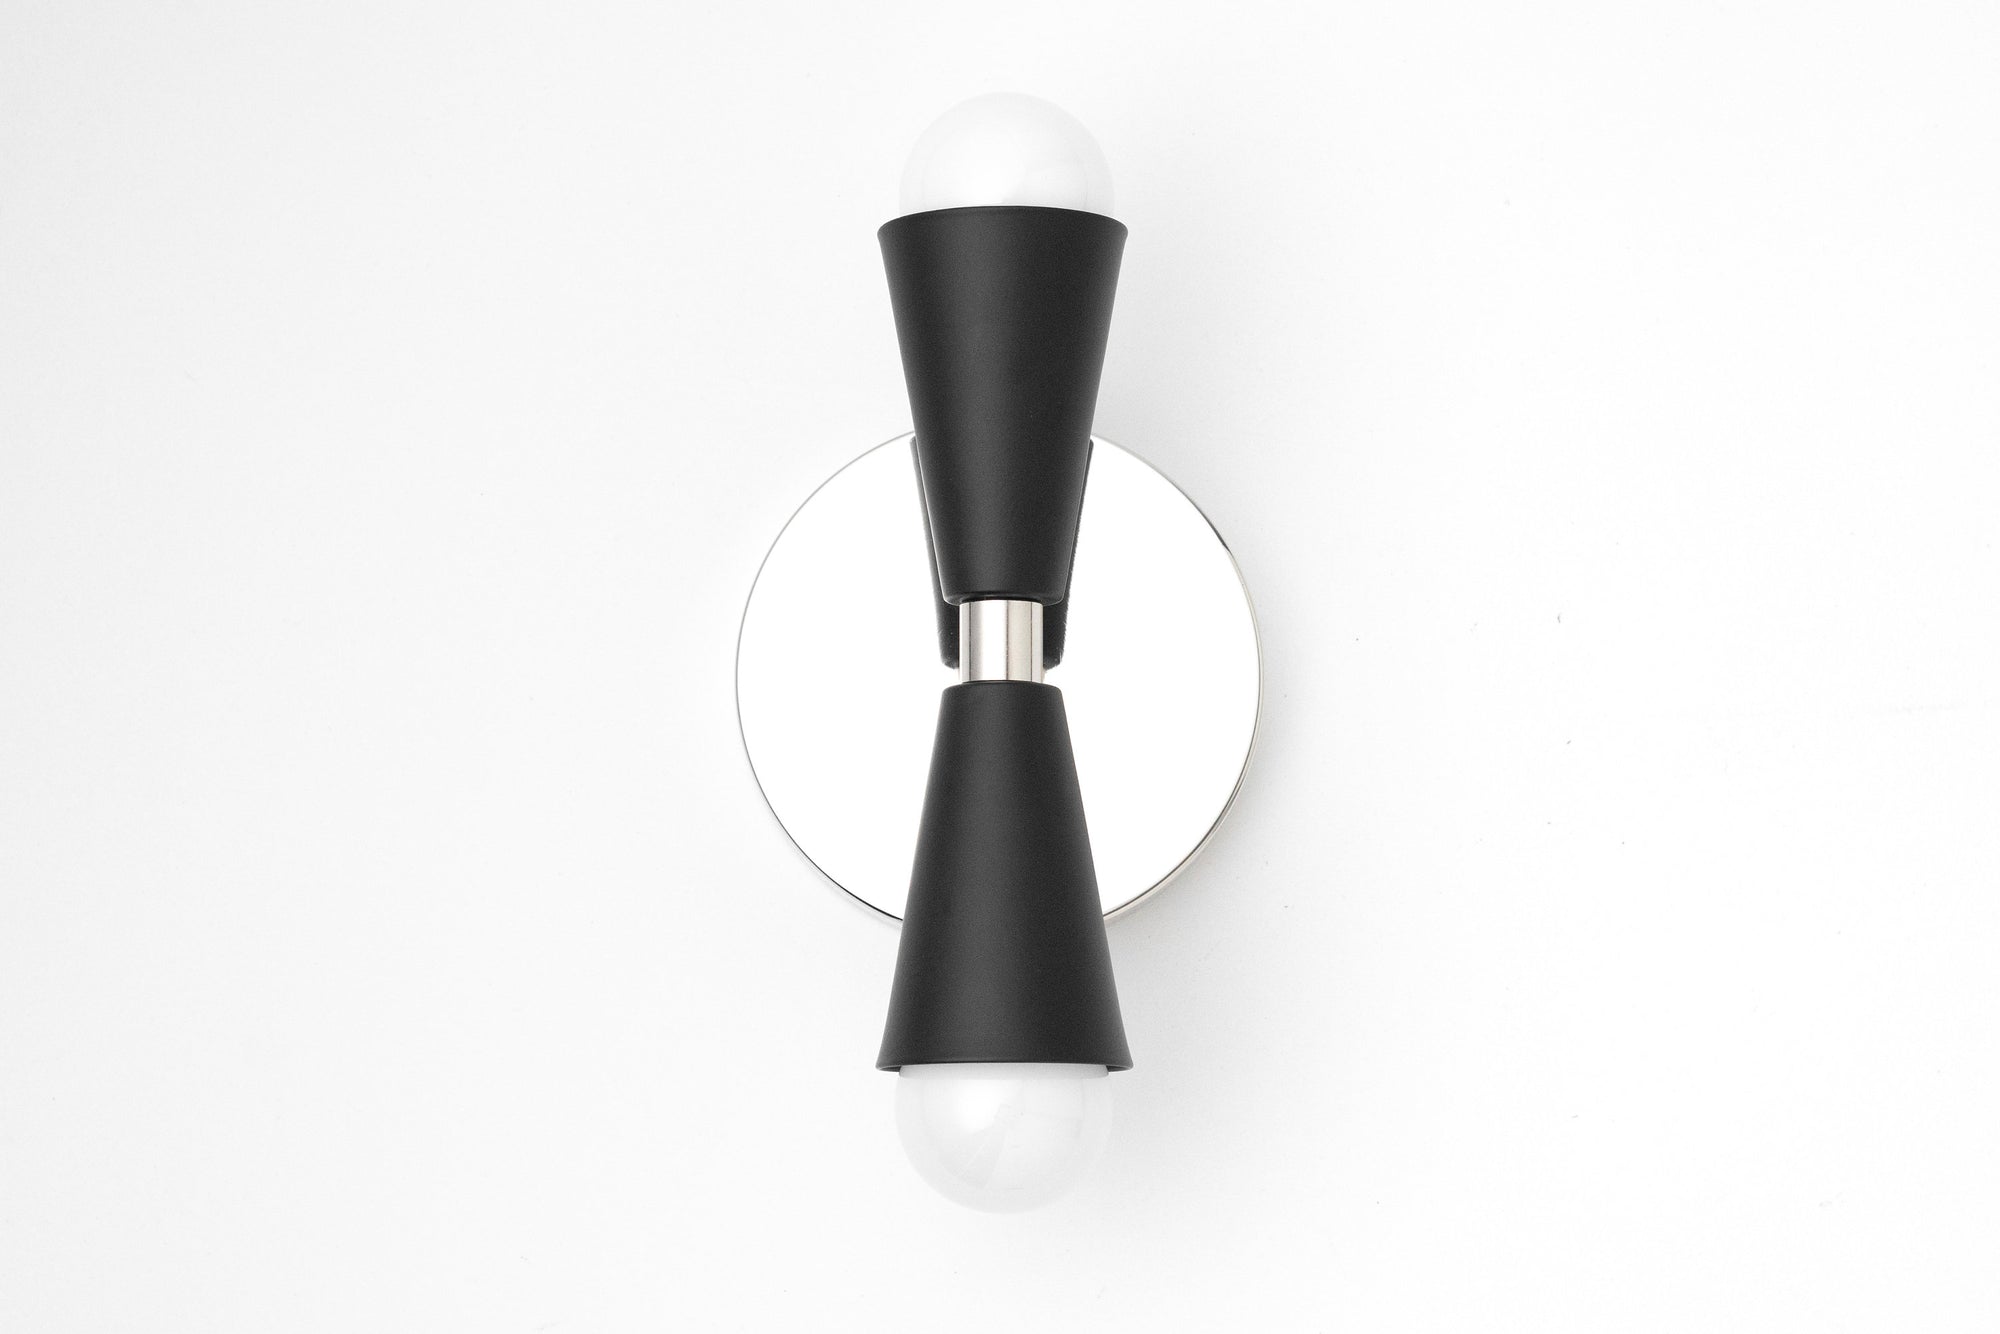 SCONCE MODEL No. 4681 - Peared Creation